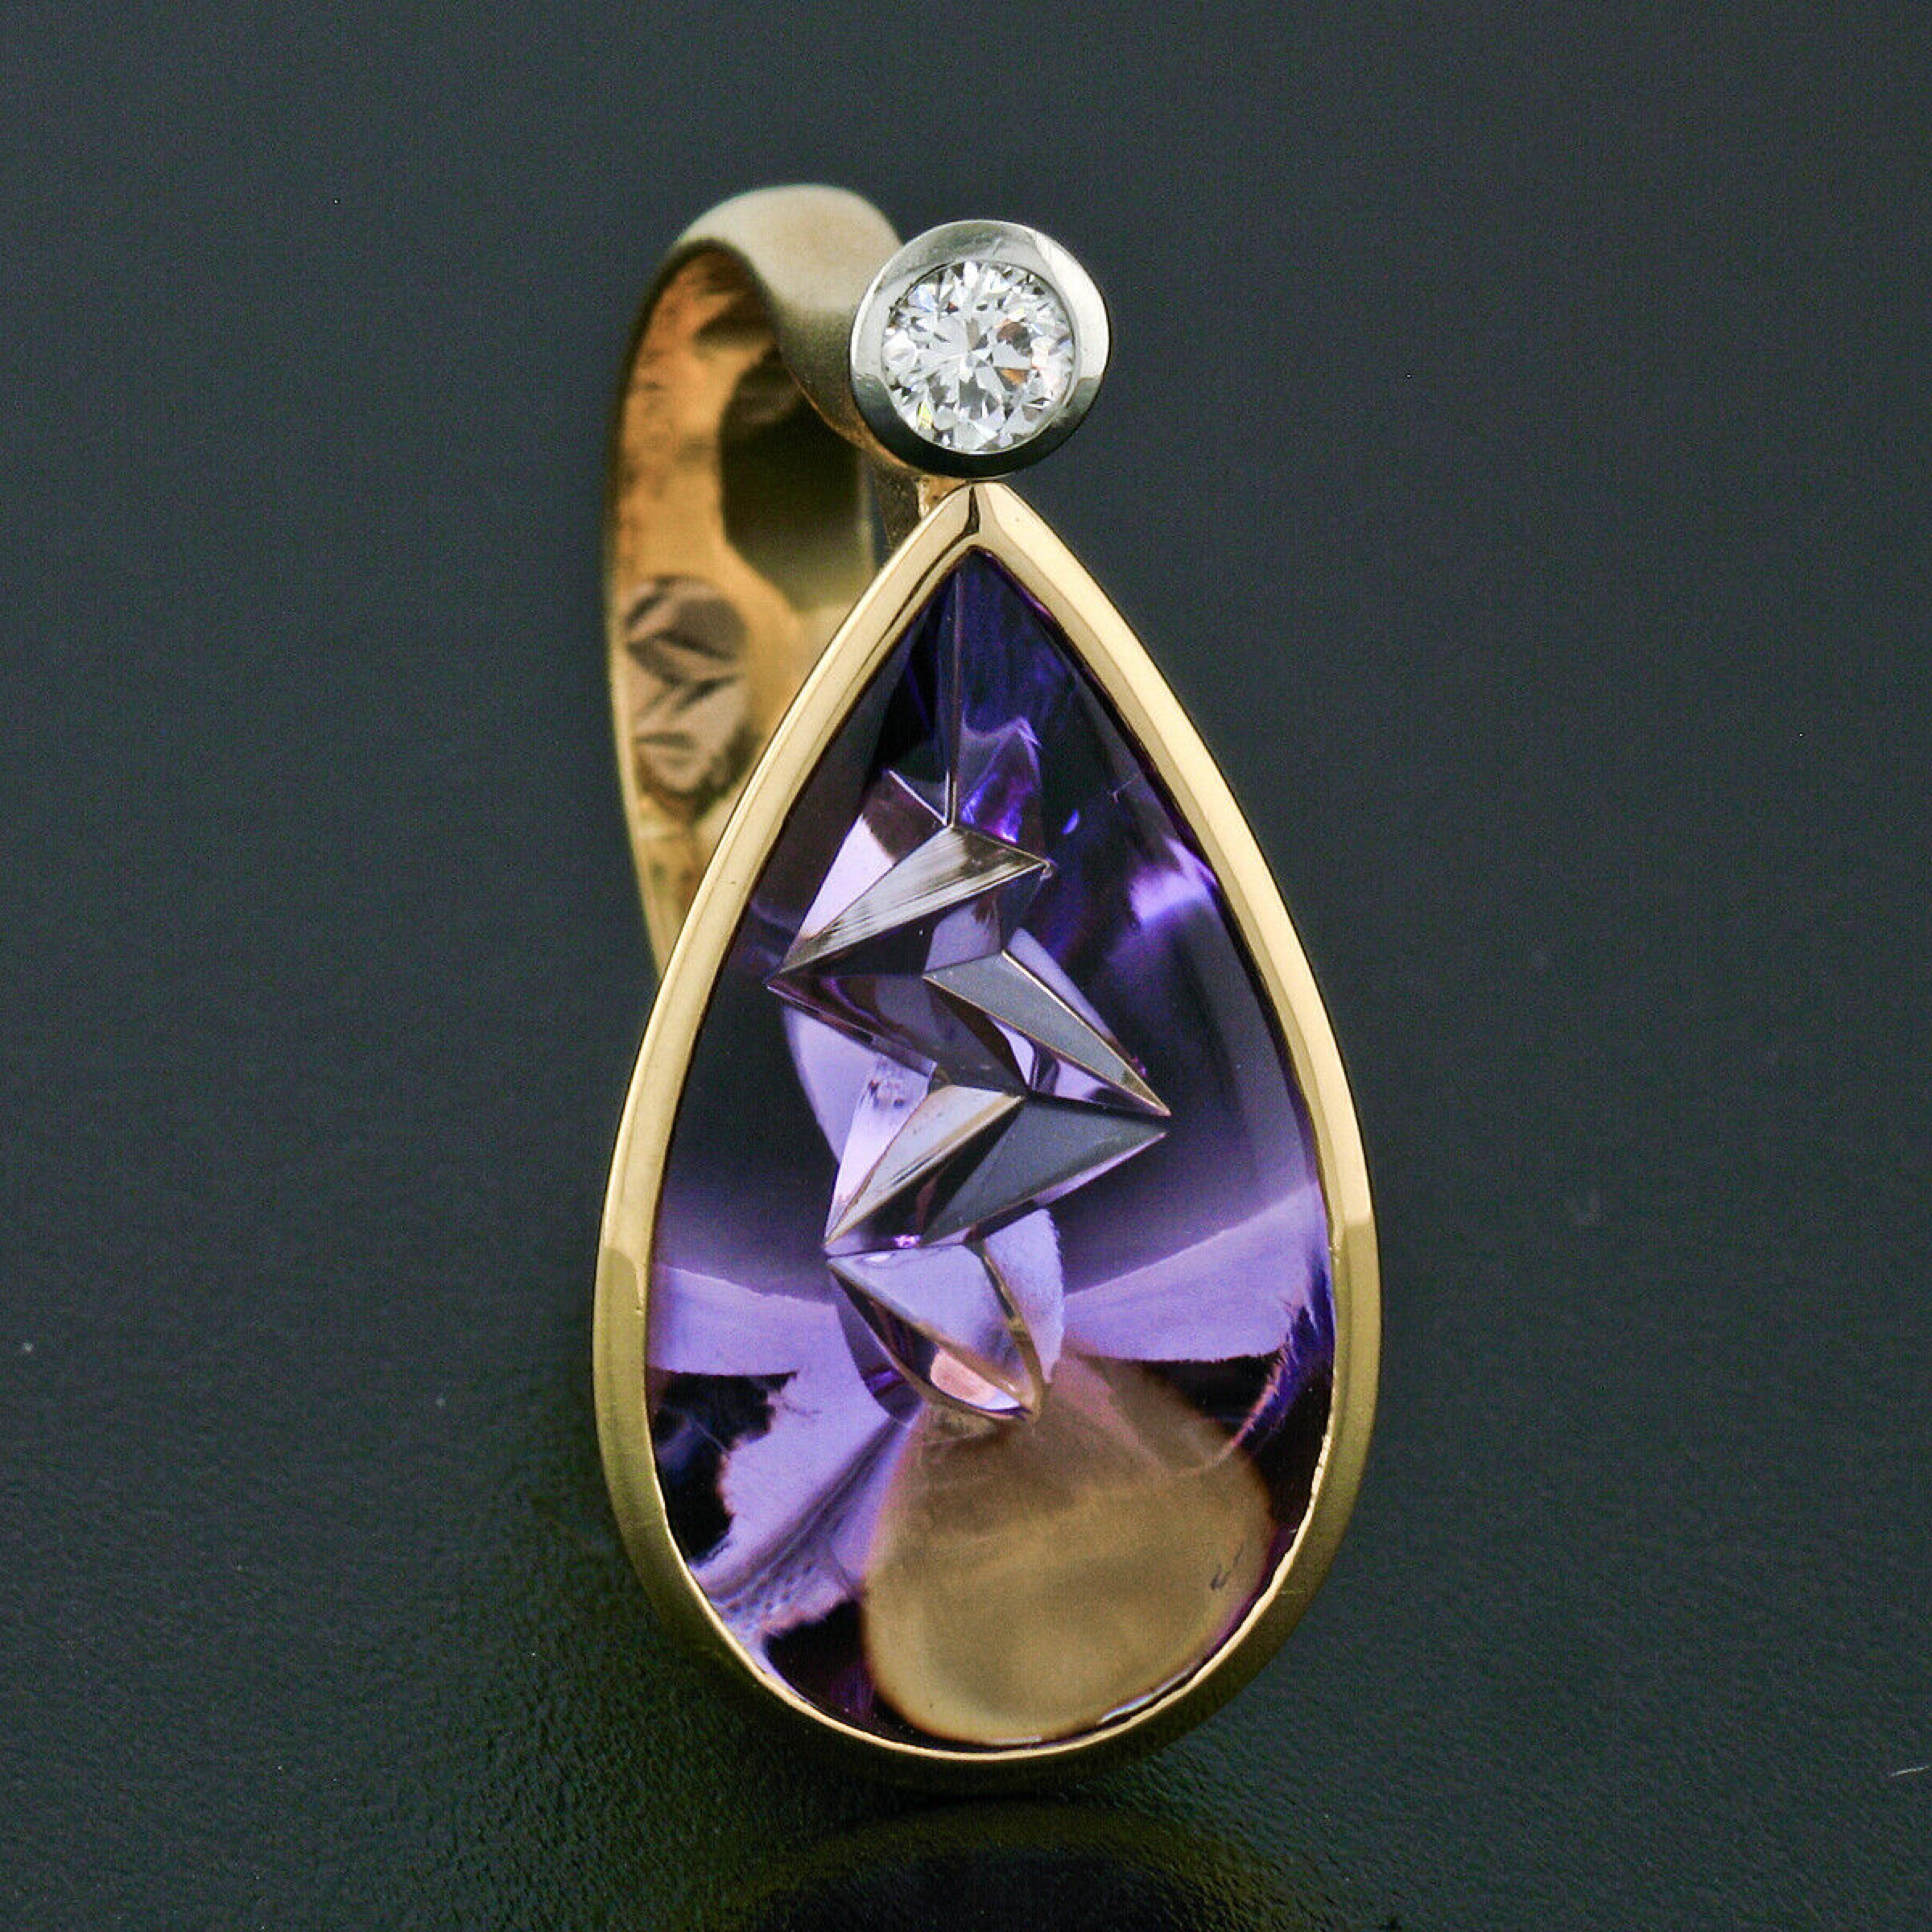 Women's 18k Yellow Gold Atelier Munsteiner Icicle Cut Amethyst Diamond Ring w/ Papers